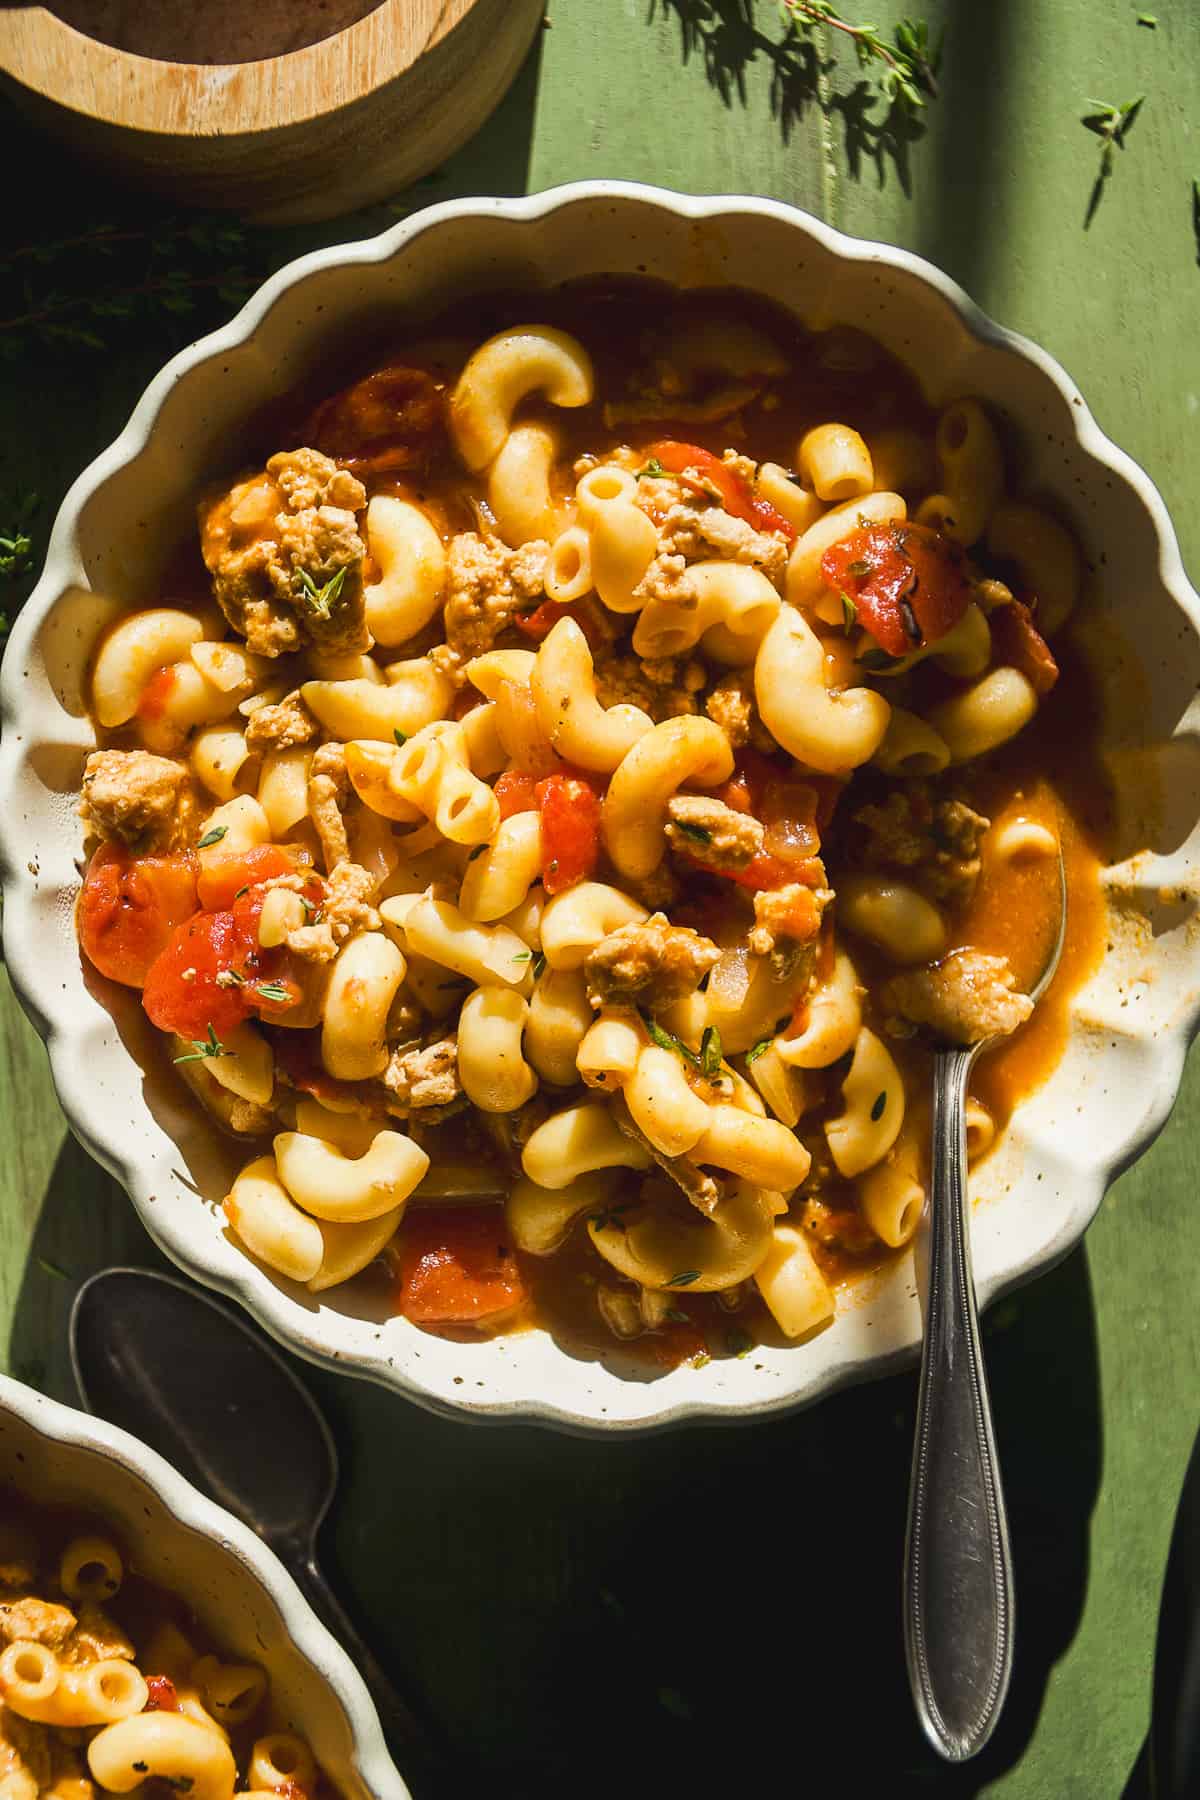 Macaroni soup with tomatoes and ground turkey in a bowl.